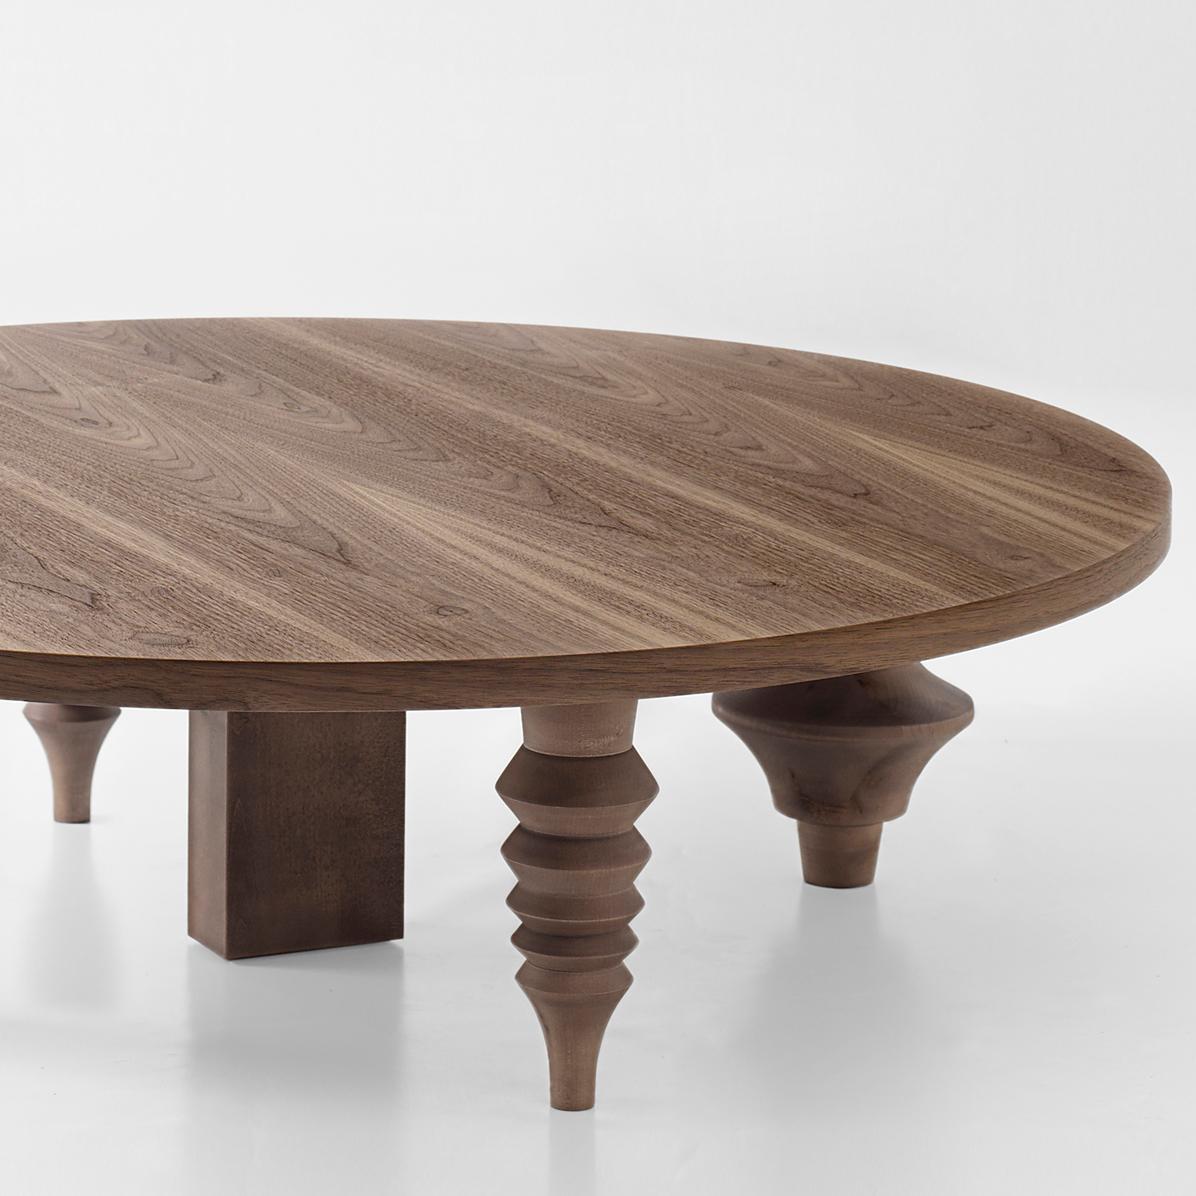 Modern Jaime Hayon Contemporary Rounded Multi Leg Low Wood Table by BD Barcelona For Sale